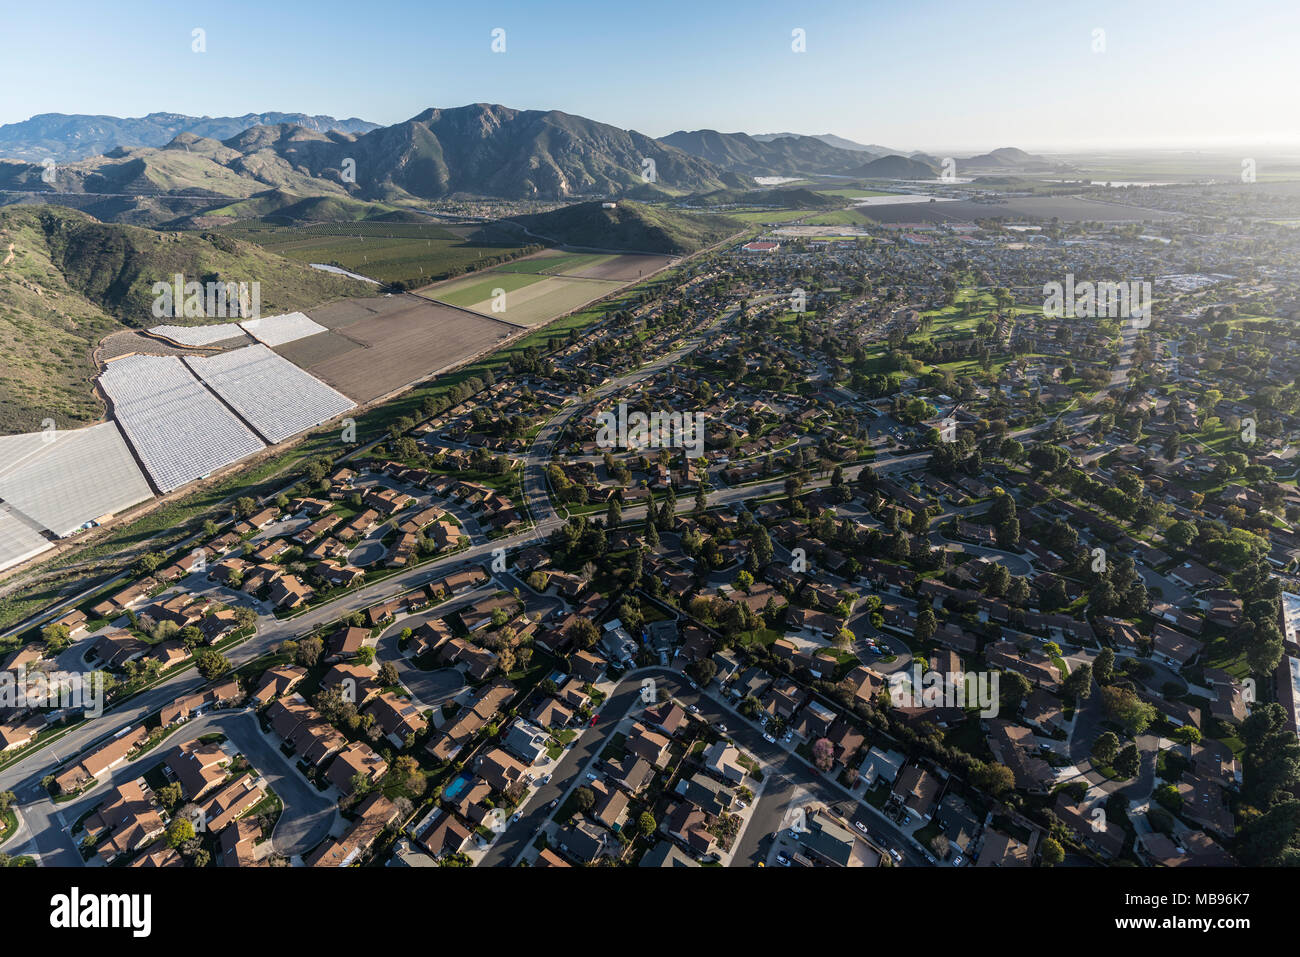 Aerial view of Camarillo homes, hills and farms in Ventura County, California. Stock Photo